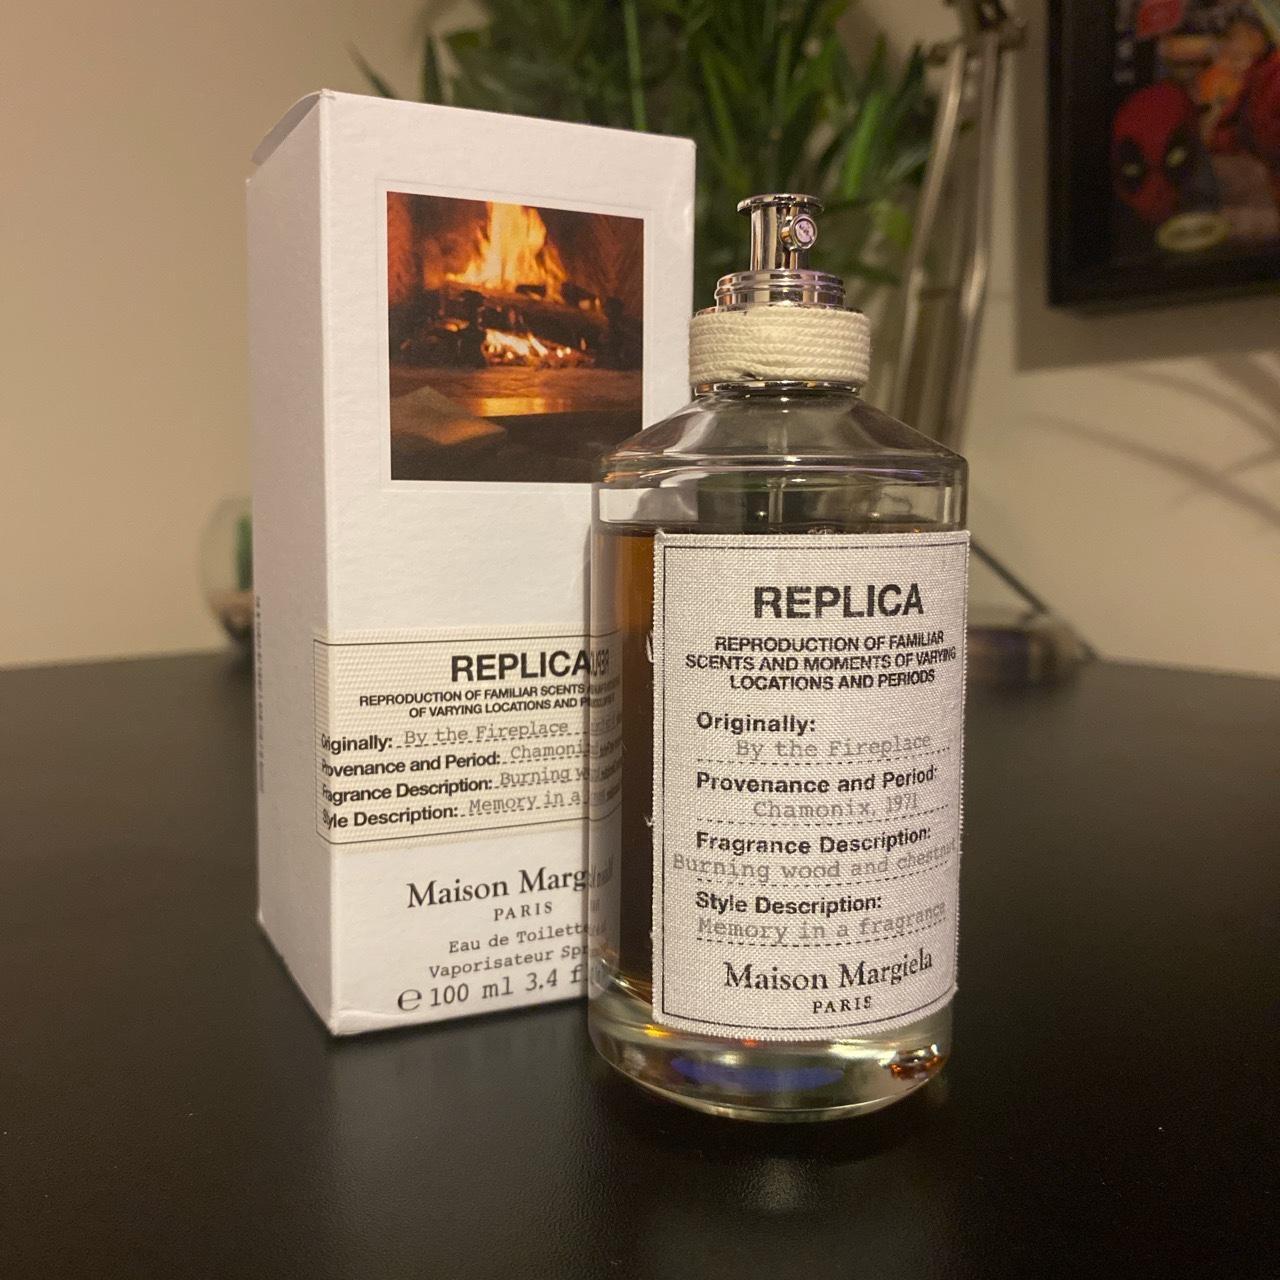 Maison Margiela By The Fireplace 2ml Comes in 2ml... - Depop